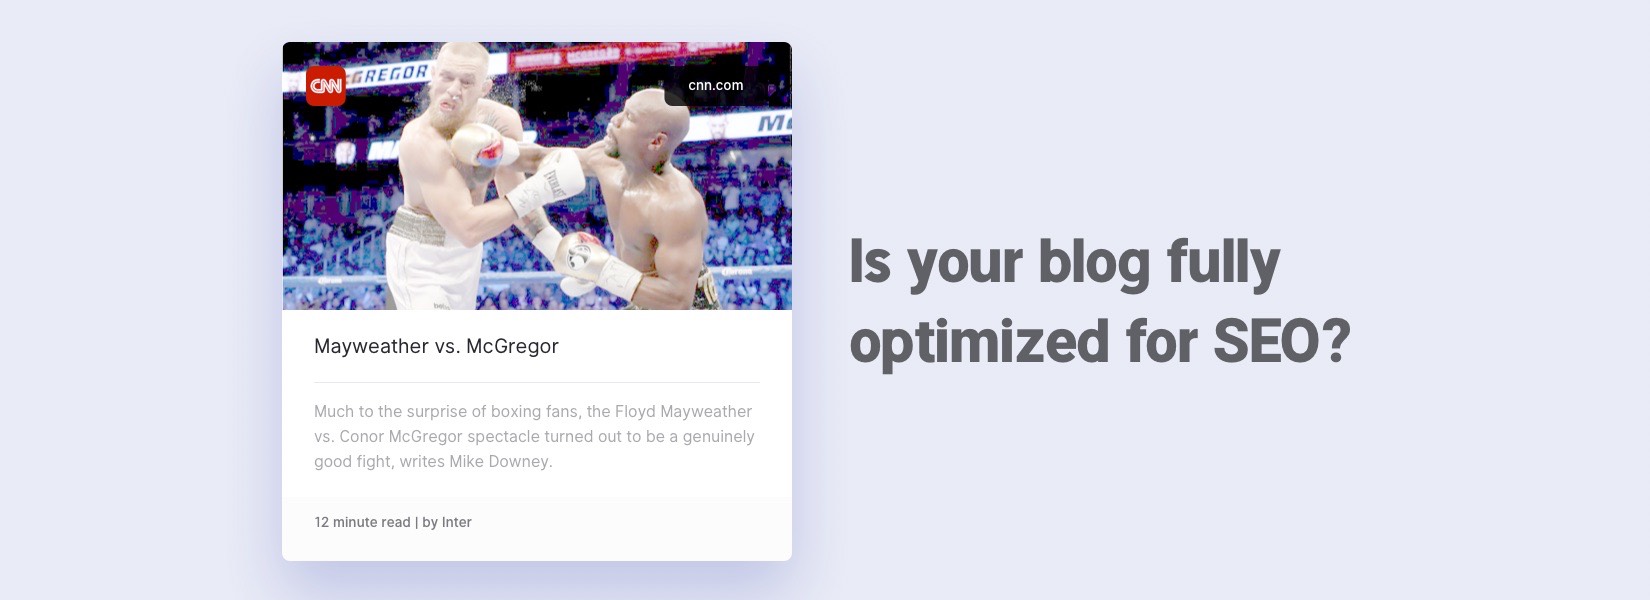 Is your Blog fully optimized for SEO?